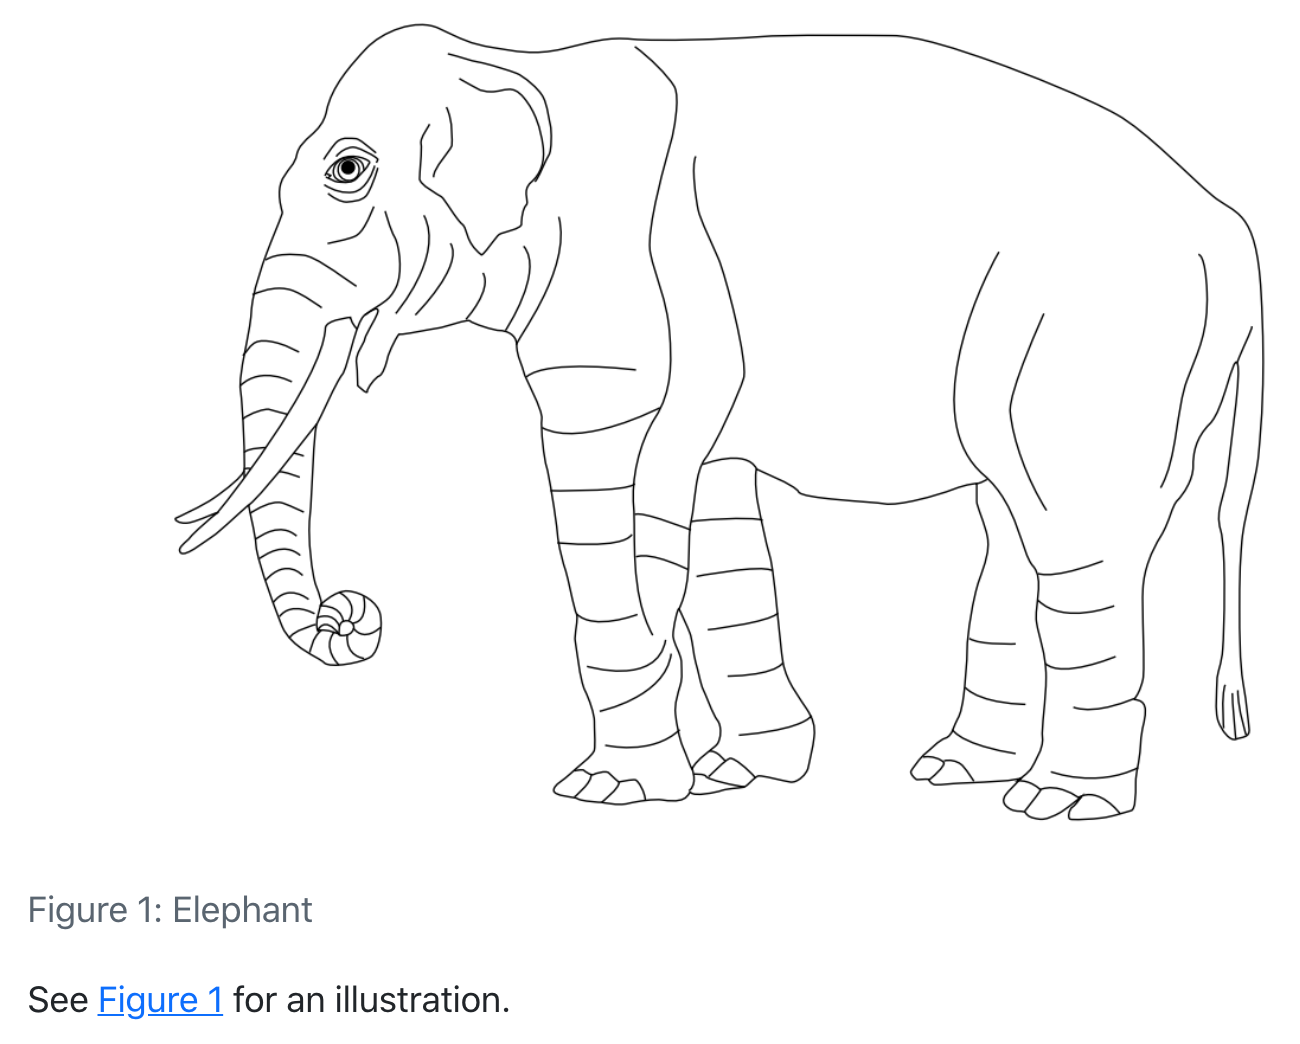 A line drawing of an elephant. The text 'Figure 1: Elephant' is centered beneath it. The text 'See fig. 1 for an illustration' is aligned to the left underneath that.